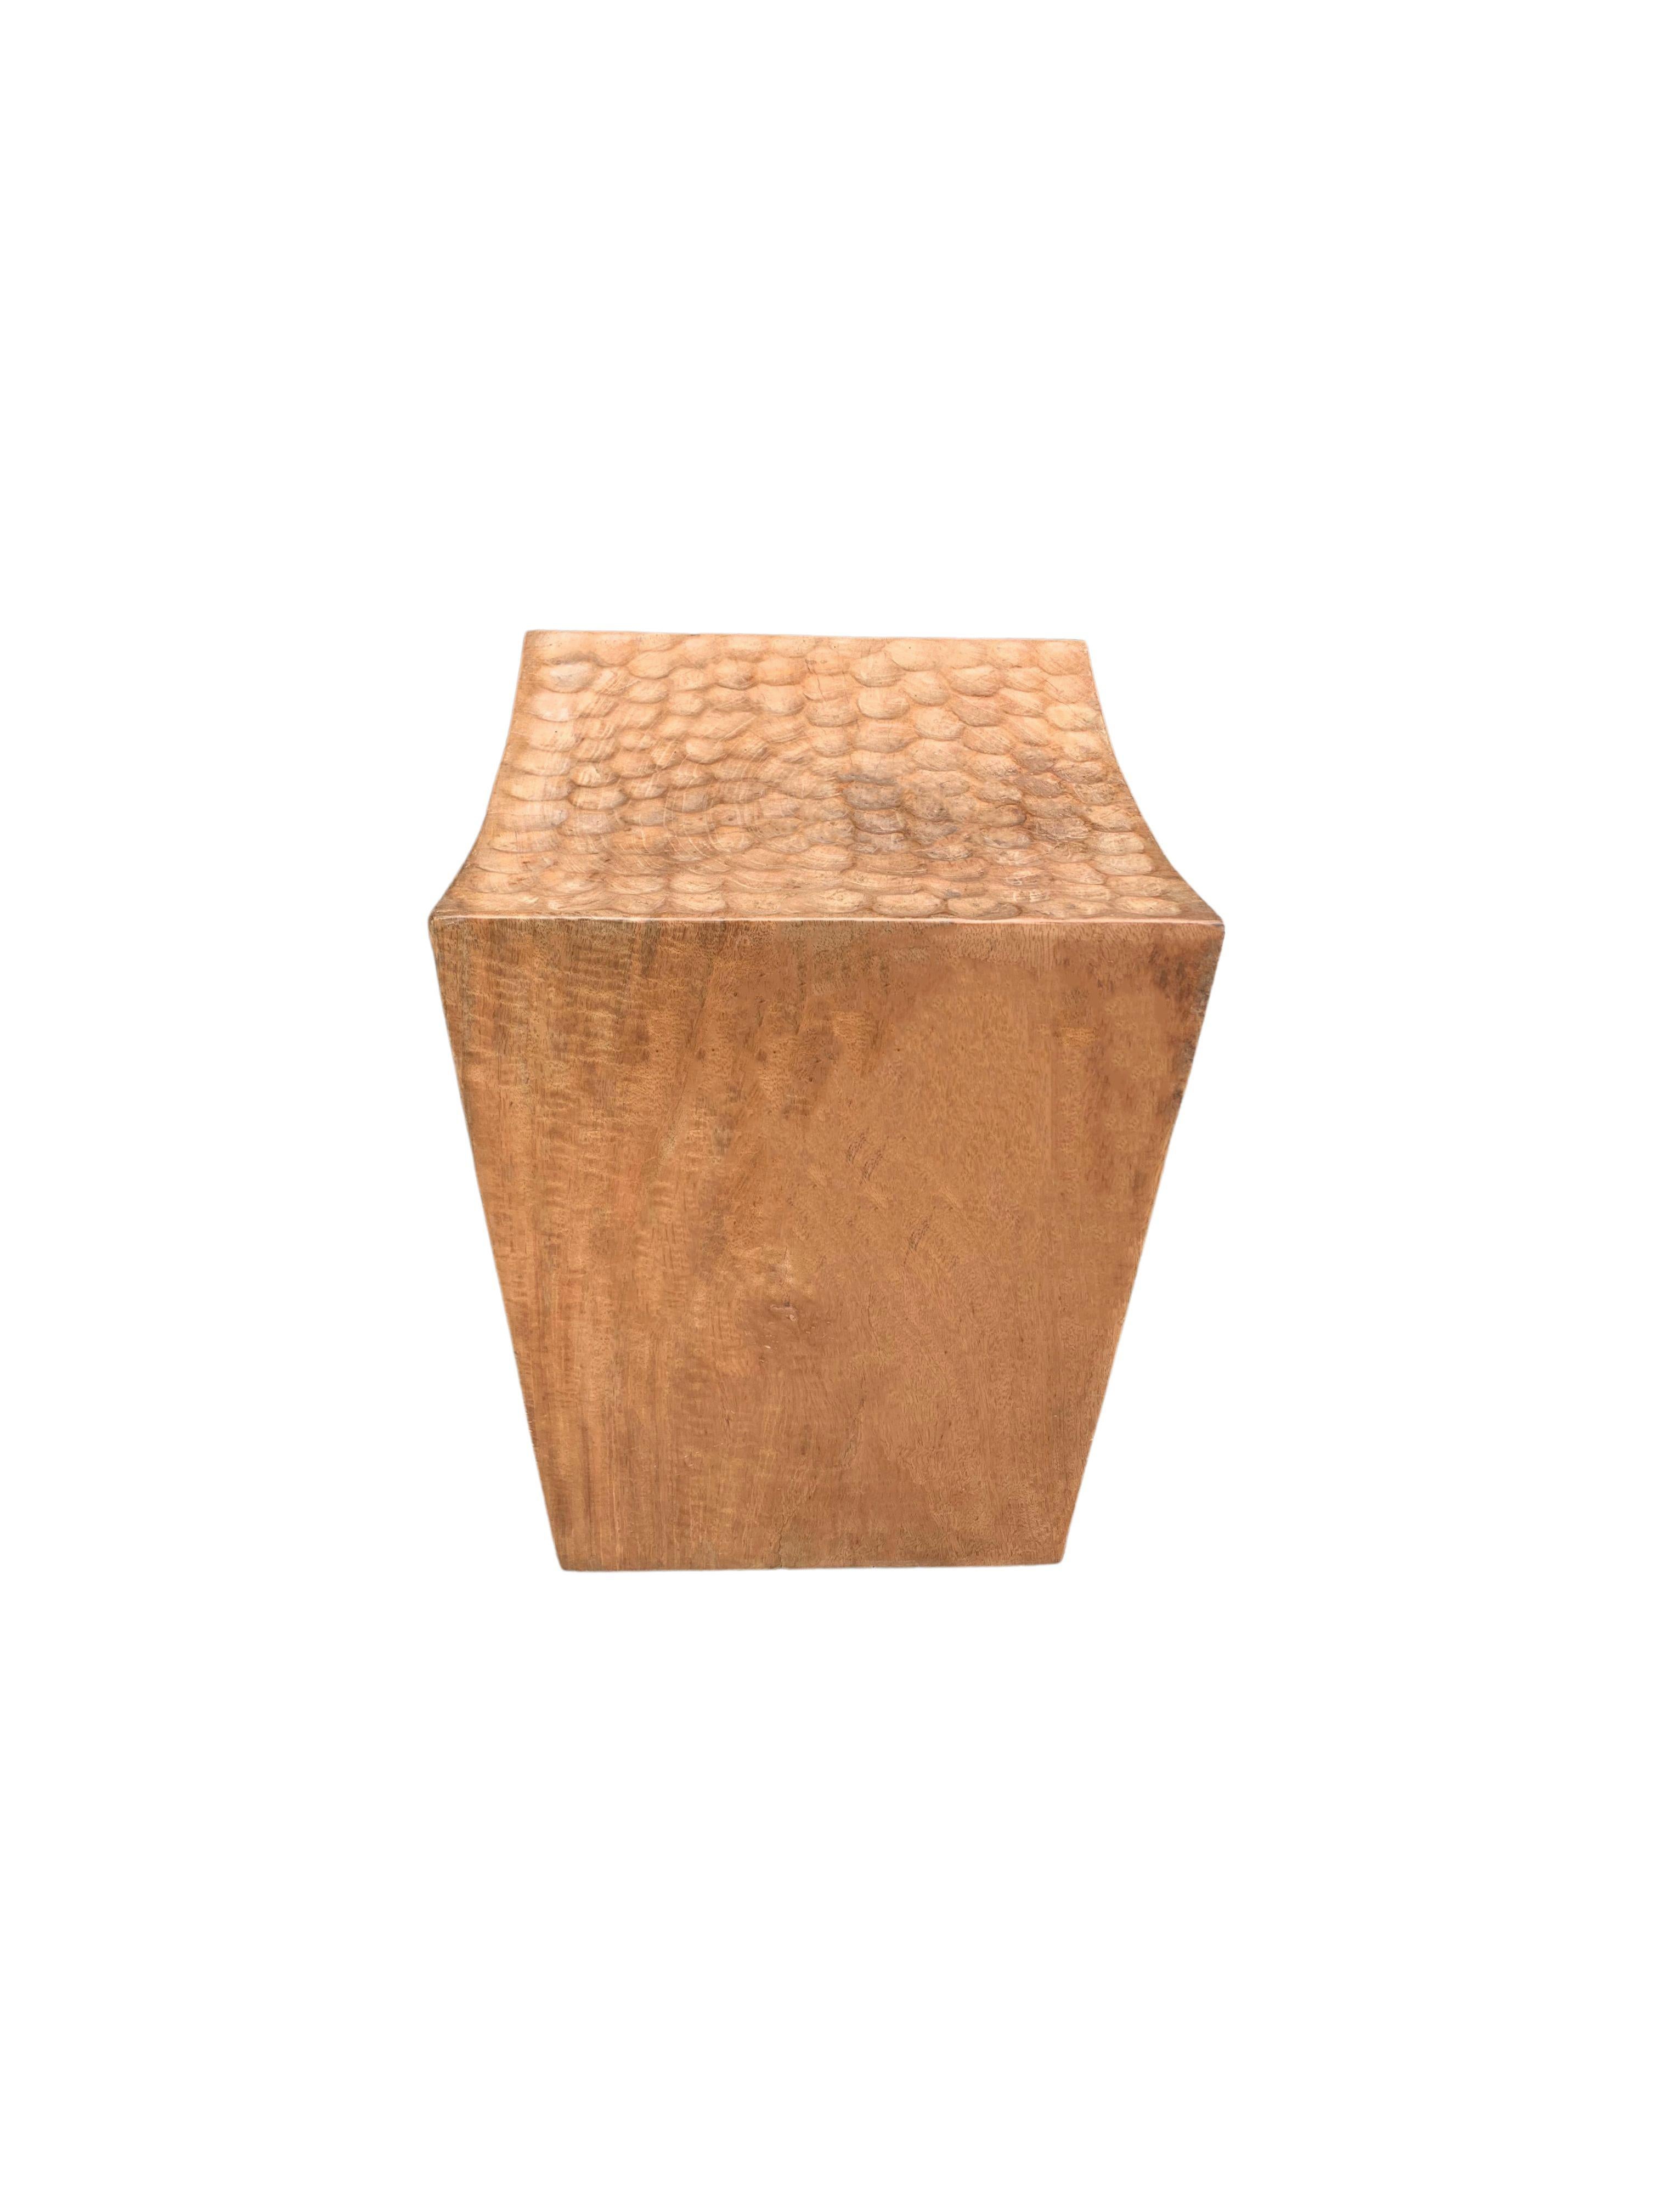 Hand-Crafted Sculptural Stool Carved from Solid Mango Wood Modern Organic For Sale